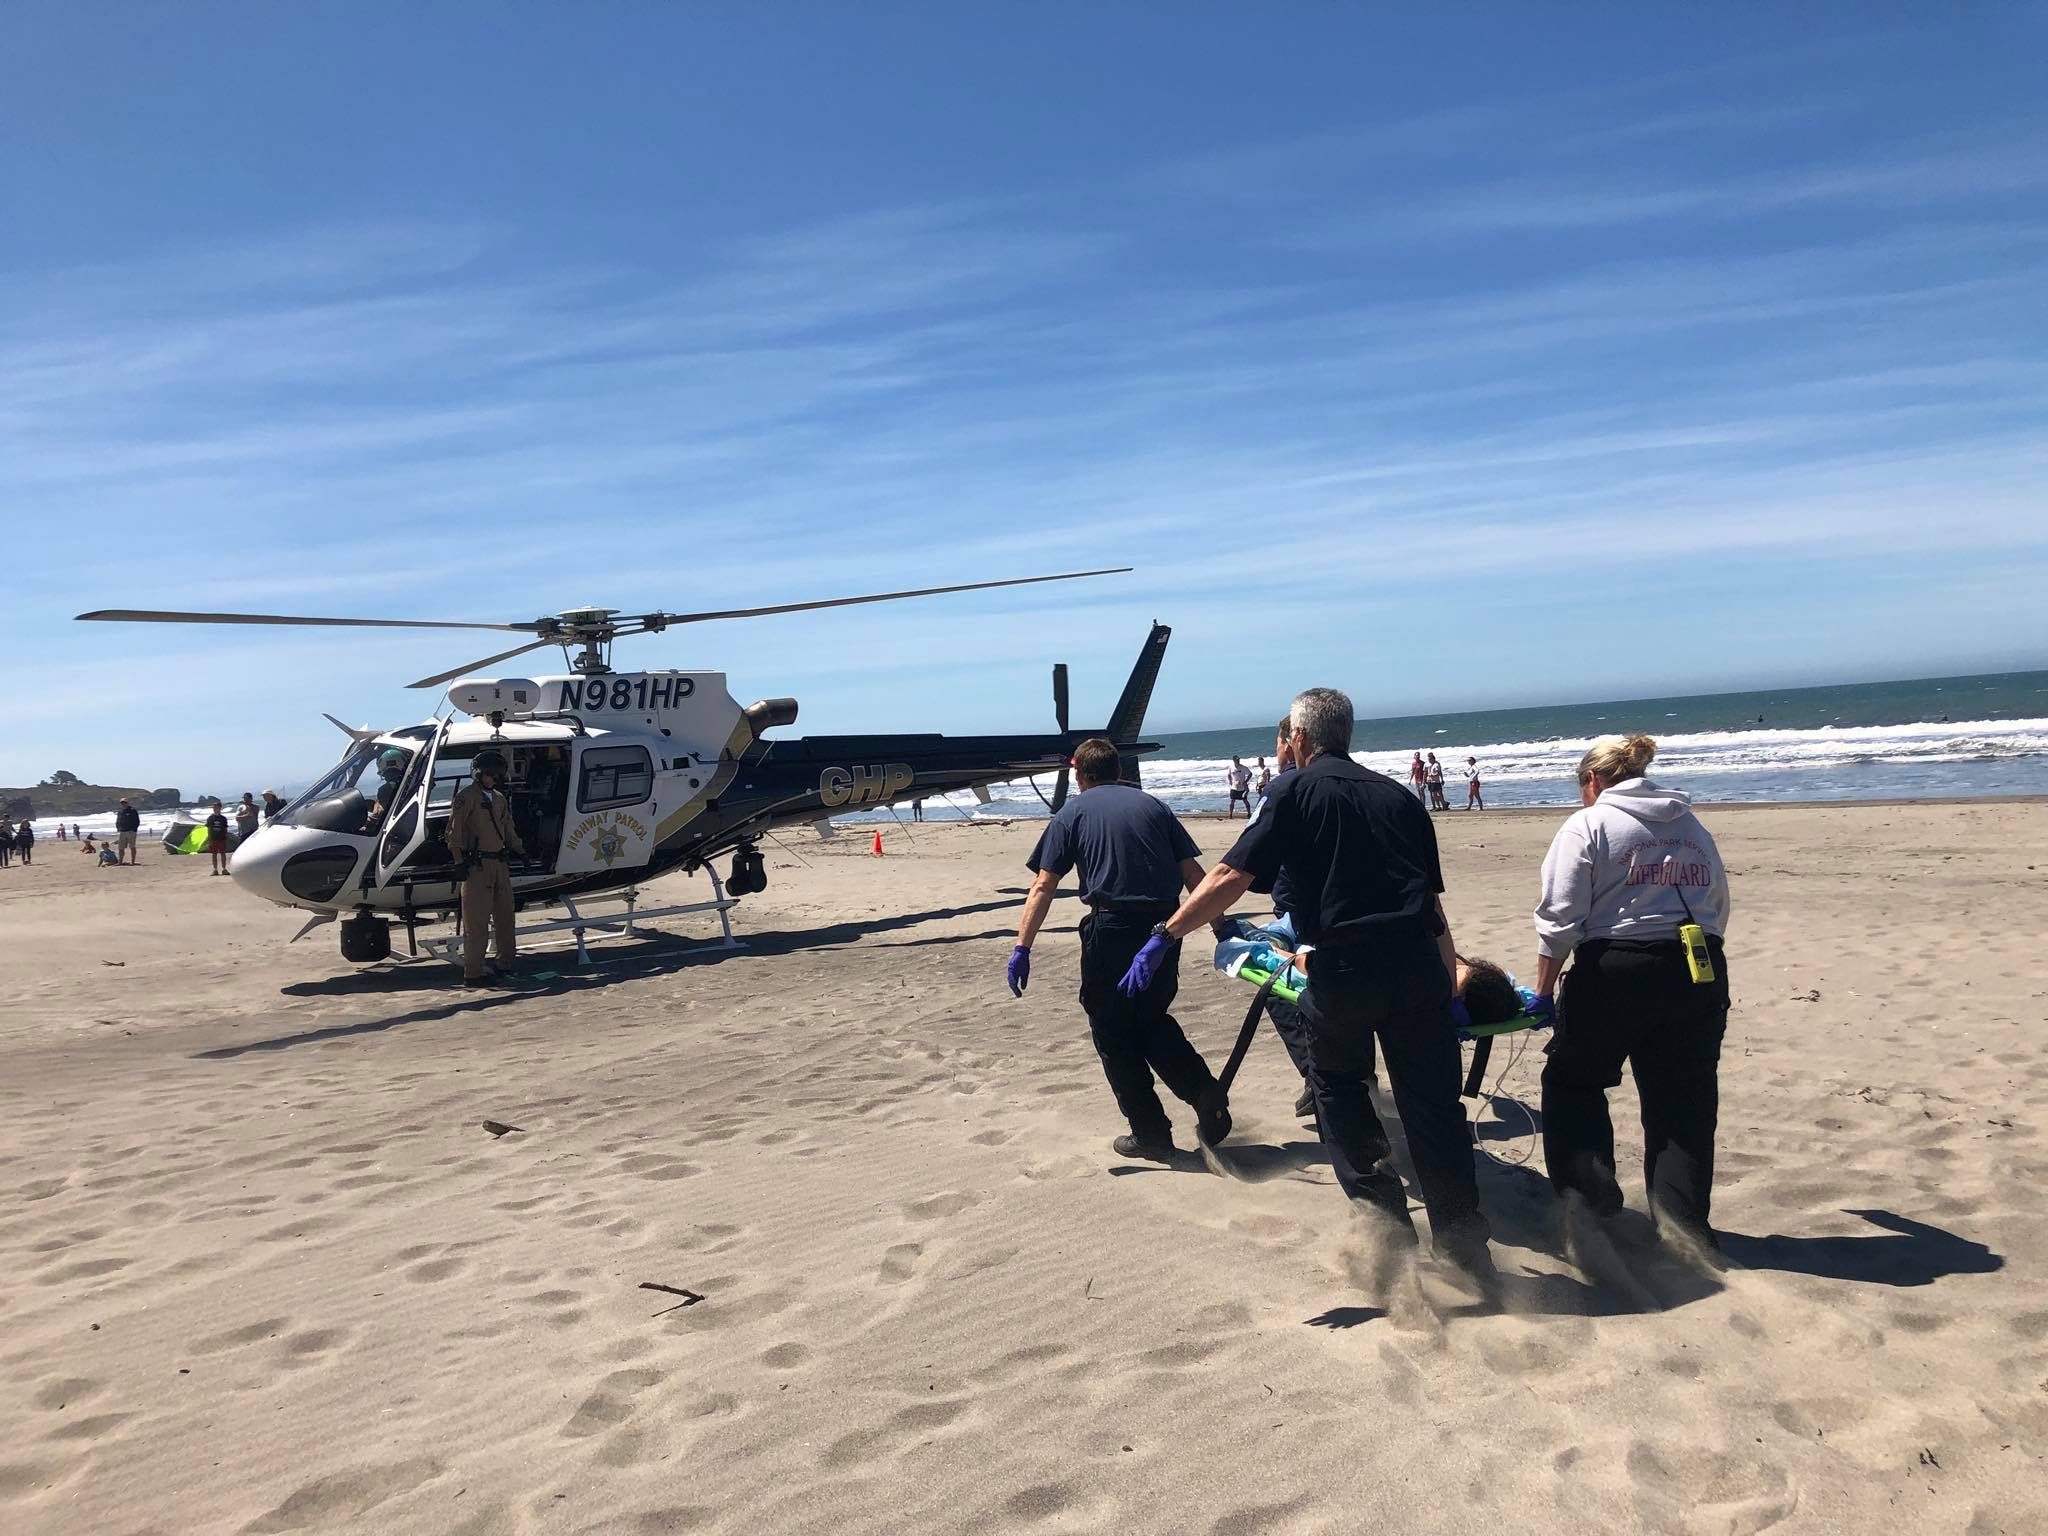 Crews rescue a 16-year-old girl during the Dipsea race in Marin County on June 10, 2018. (CHP Golden Gate Air Operations / Facebook)